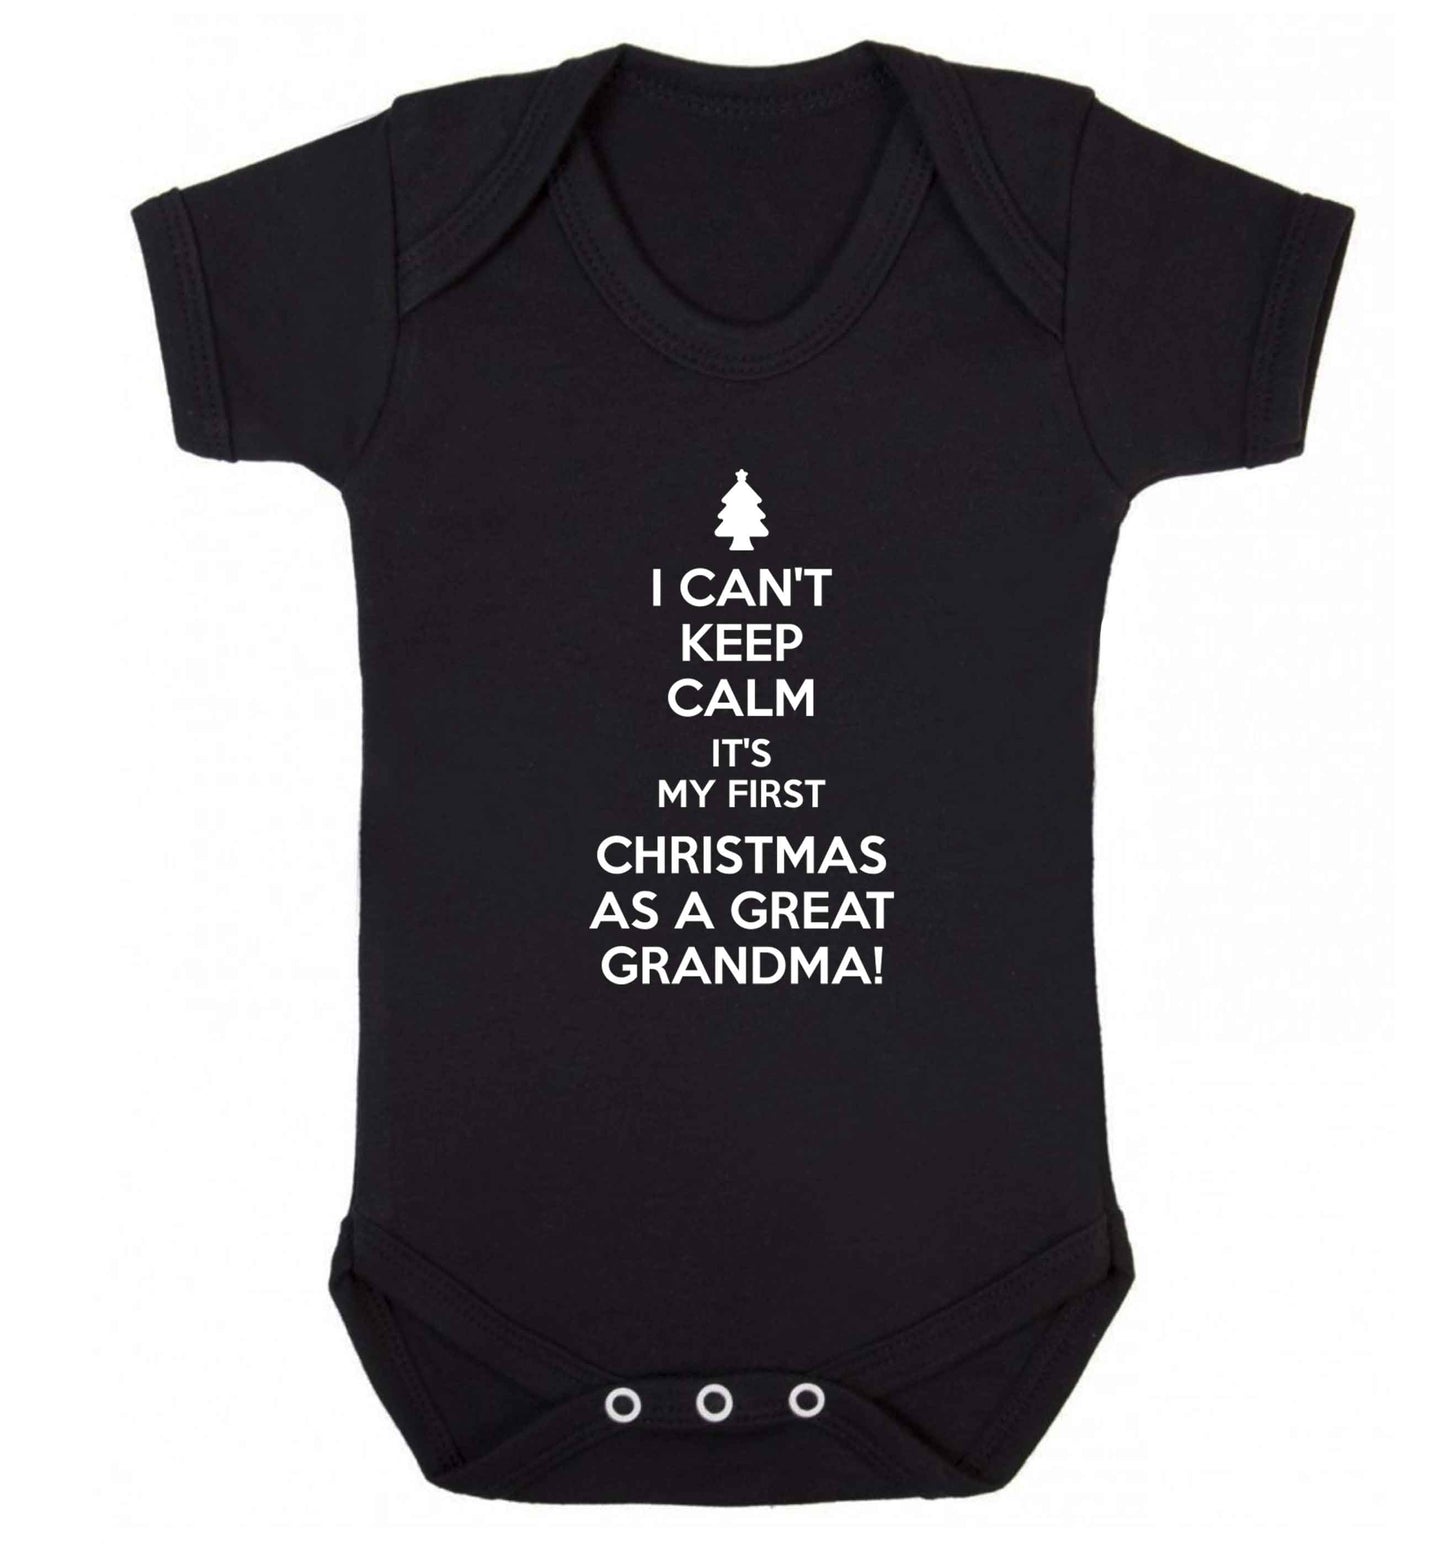 I can't keep calm it's my first Christmas as a great grandma! Baby Vest black 18-24 months